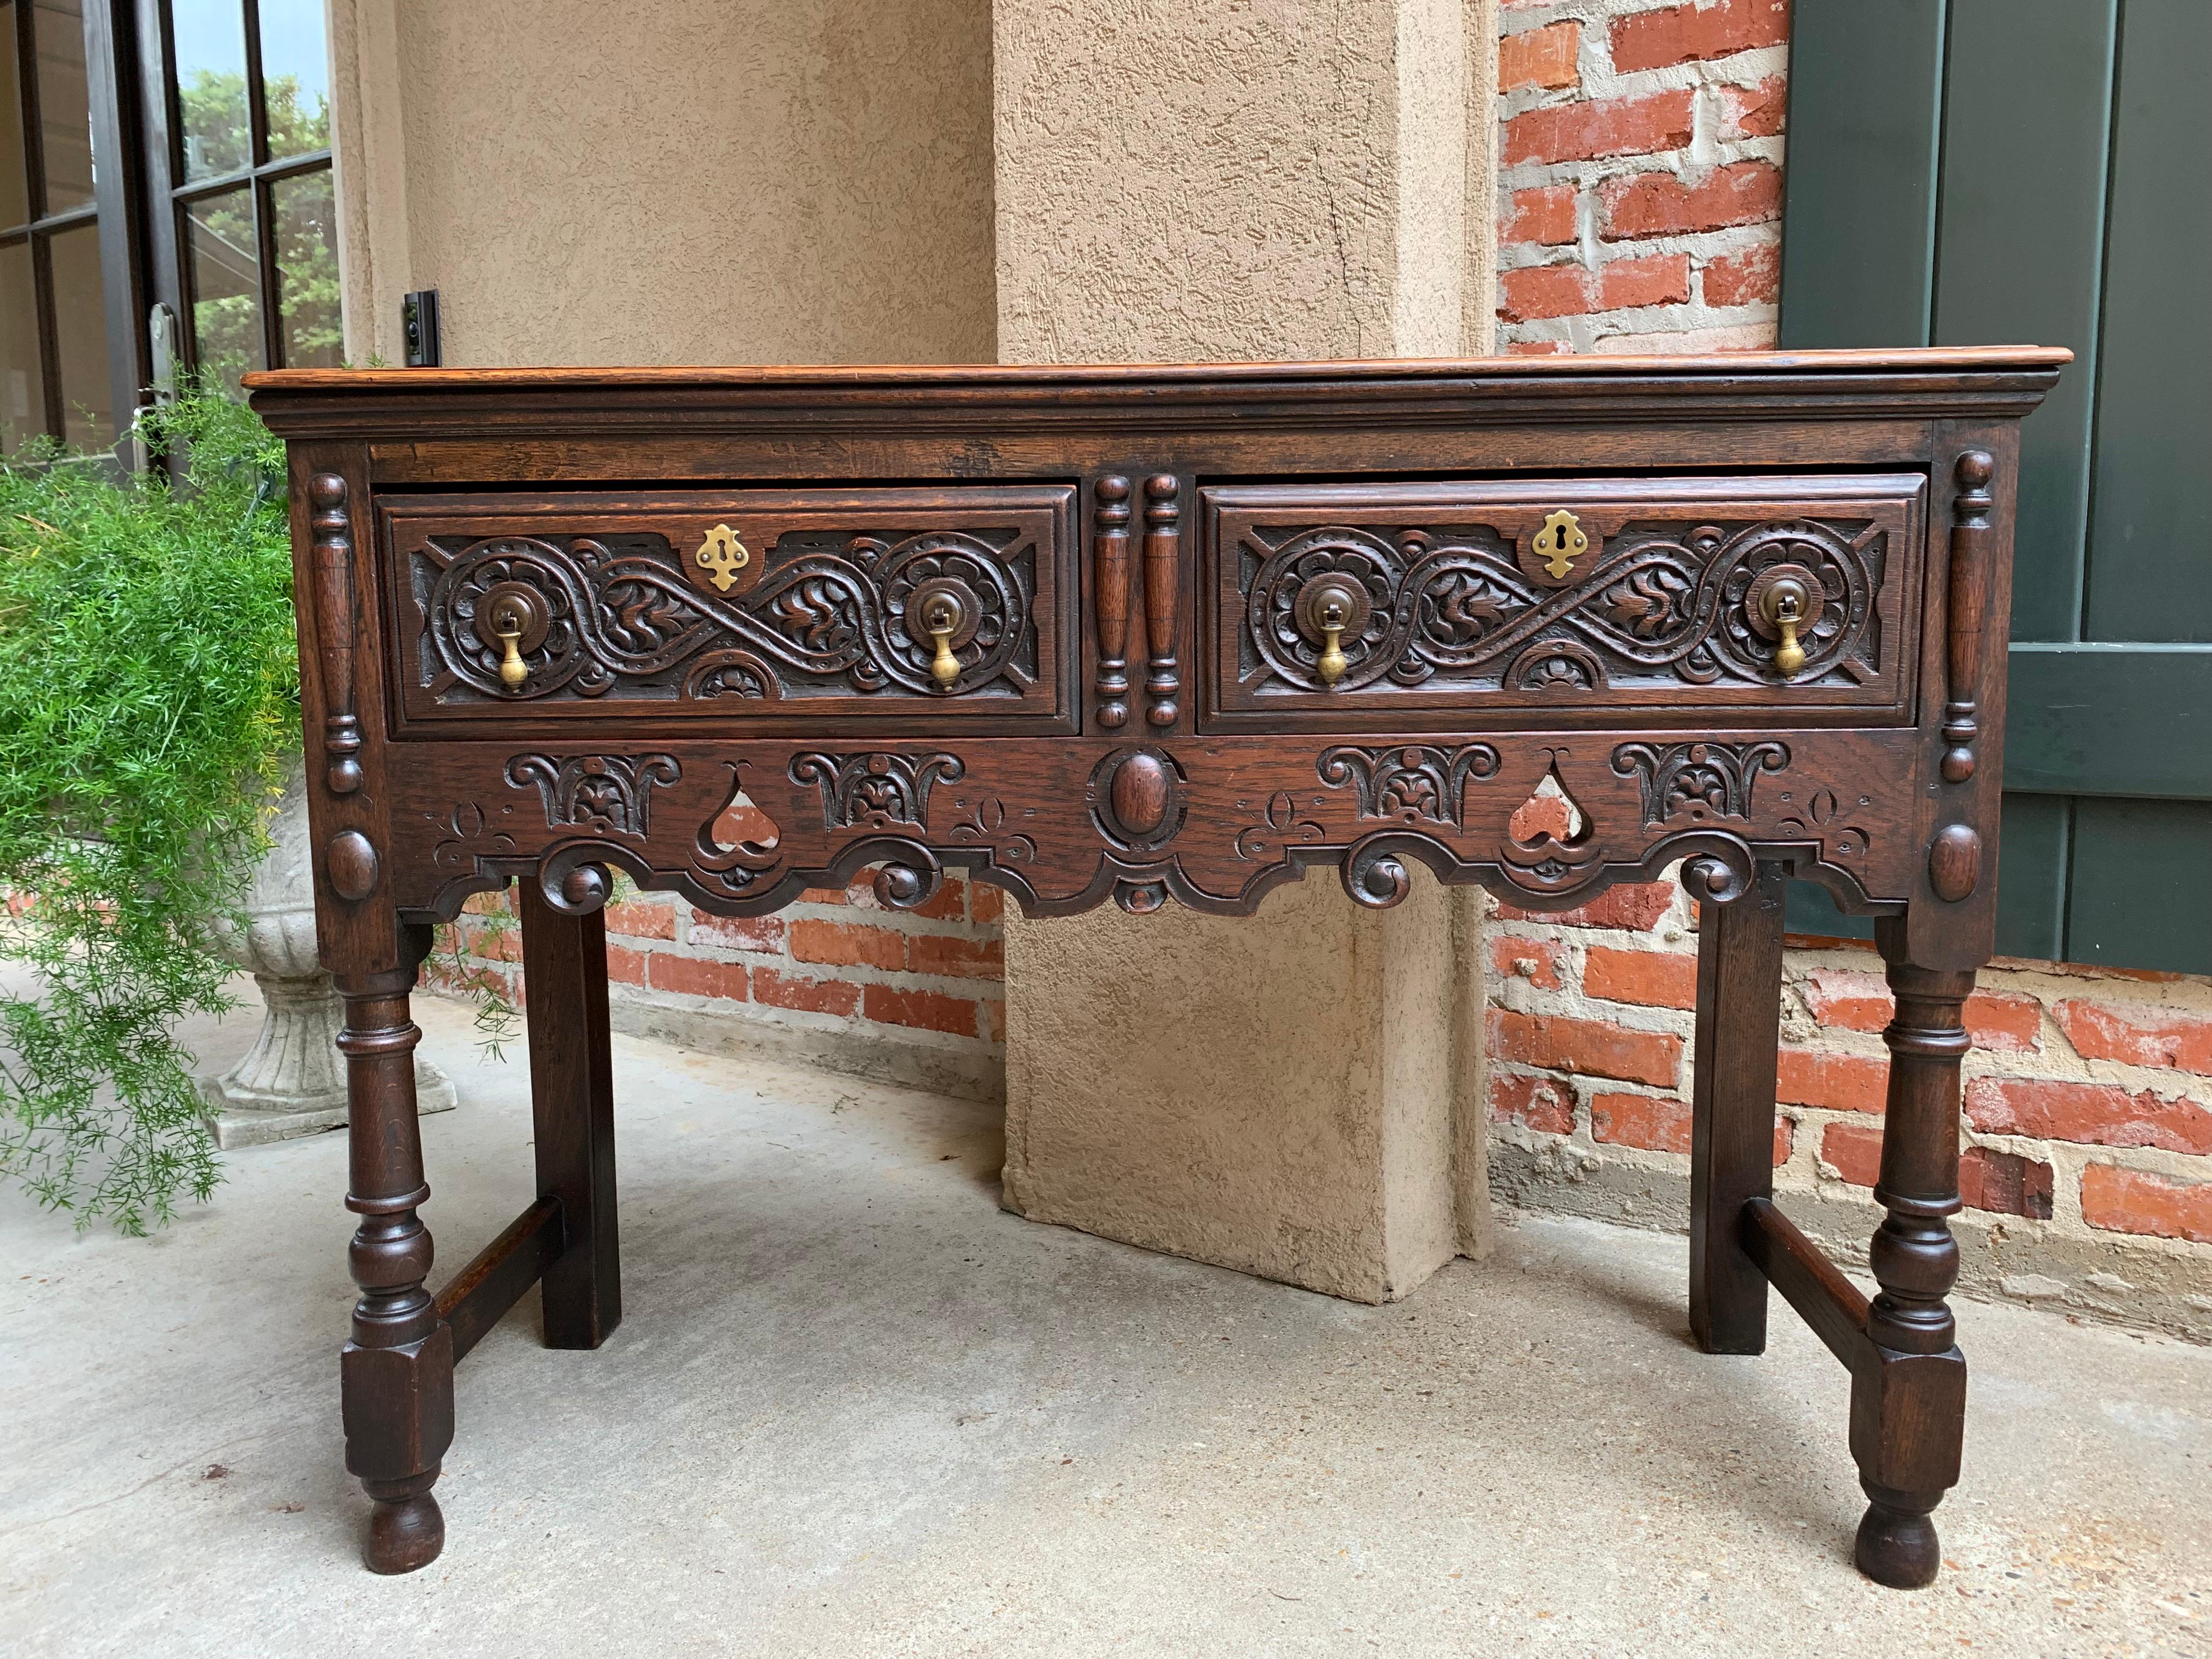 Direct from England, a gorgeous and versatile antique English carved oak sofa table!
~ Heavily carved panel fronts on both drawers
~ Elaborate carved details and open carvings on the wide front apron with scalloped lower edges
~ Large applied